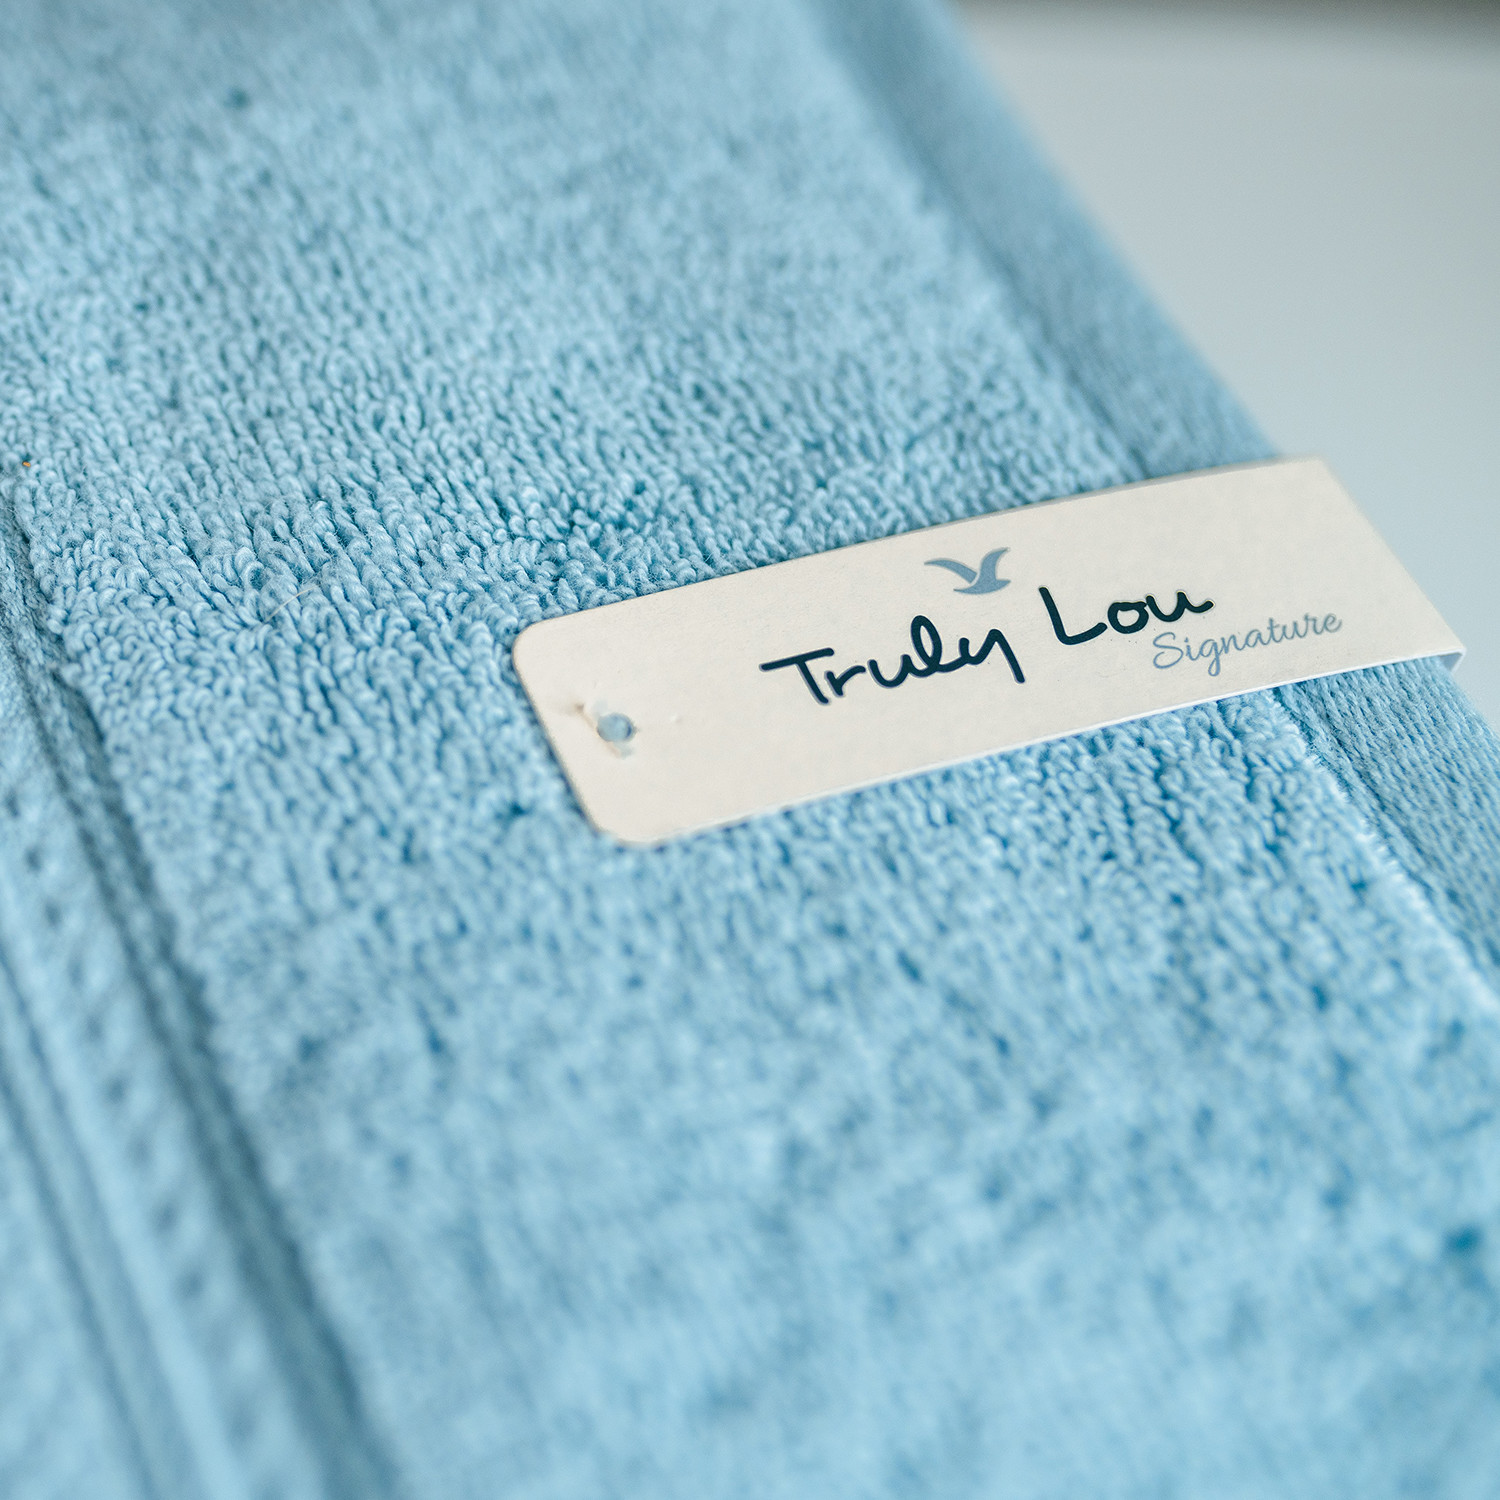 Truly Lou Towels